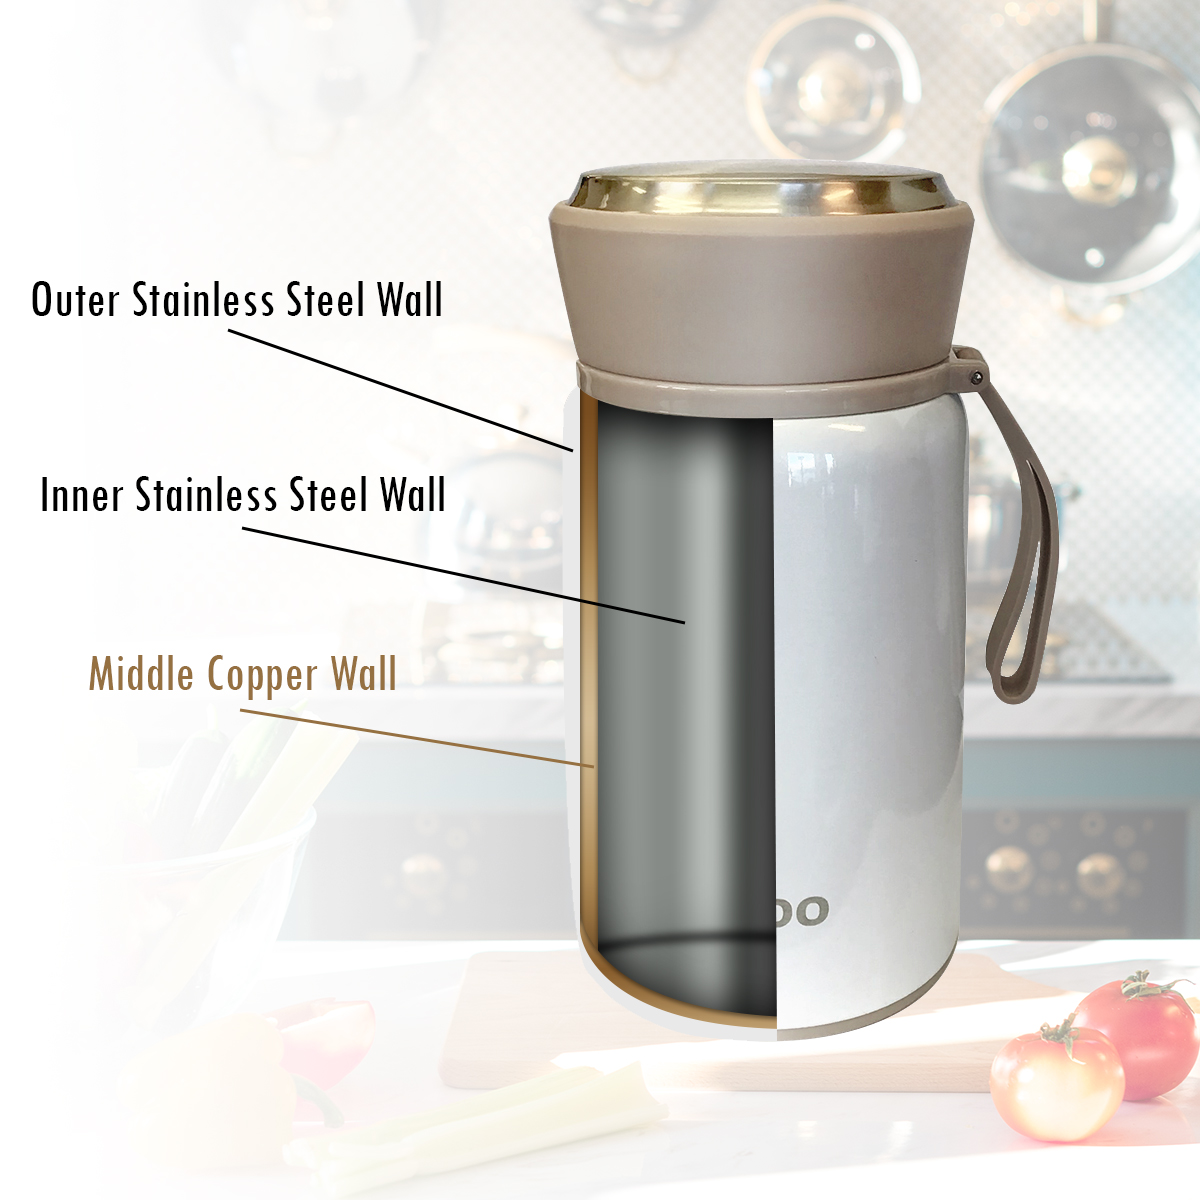 Save on Thermos Insulated Stainless Food Jar with Folding Spoon 16